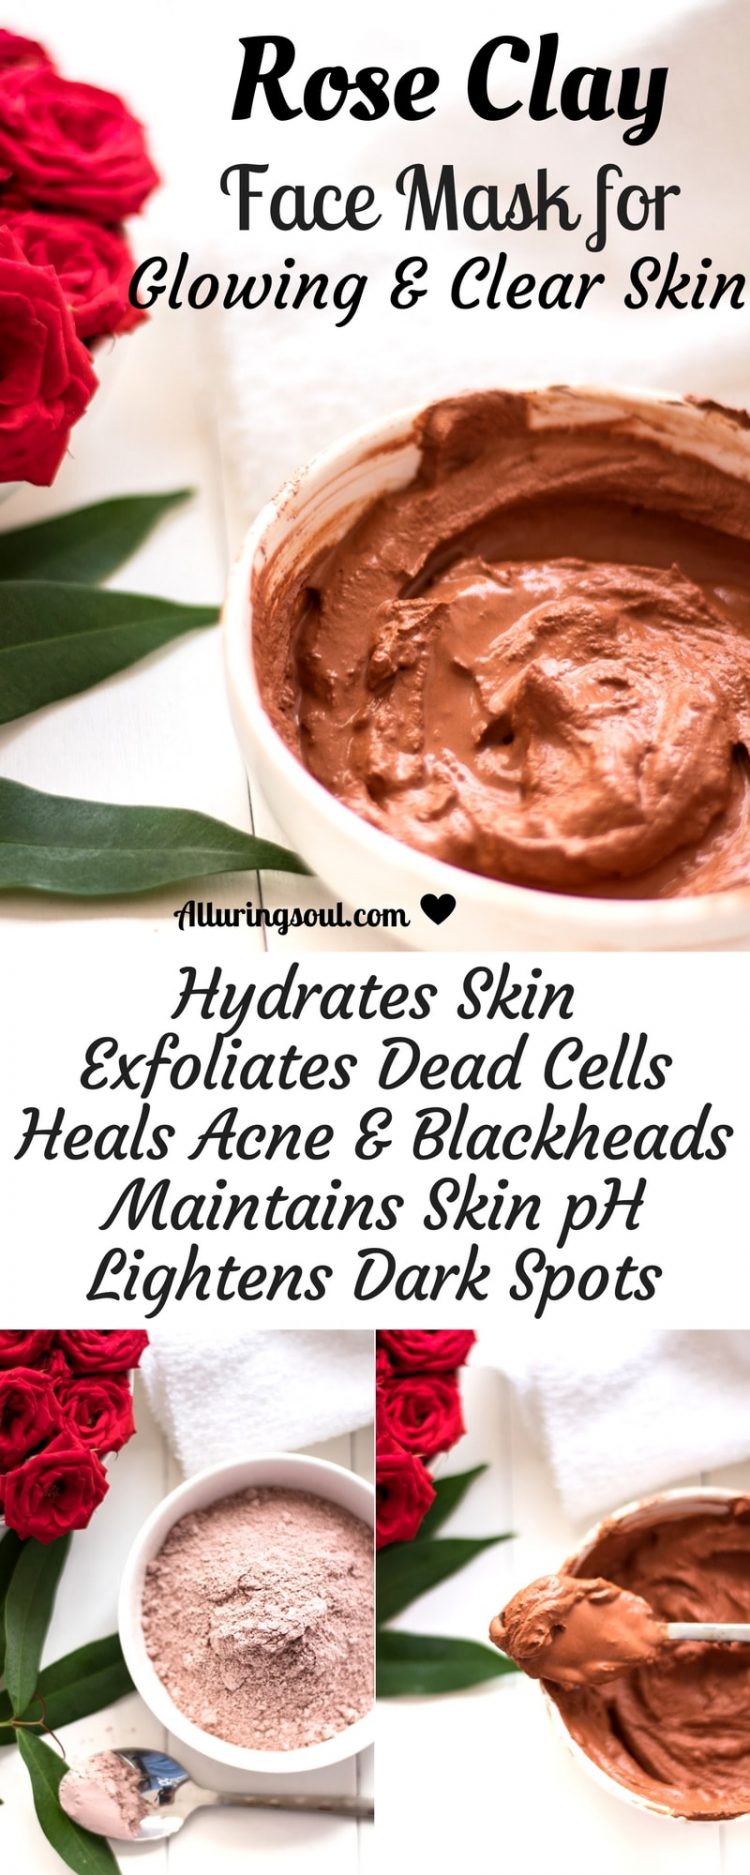 DIY Rose Clay Face Mask For Glowing & Clear Skin